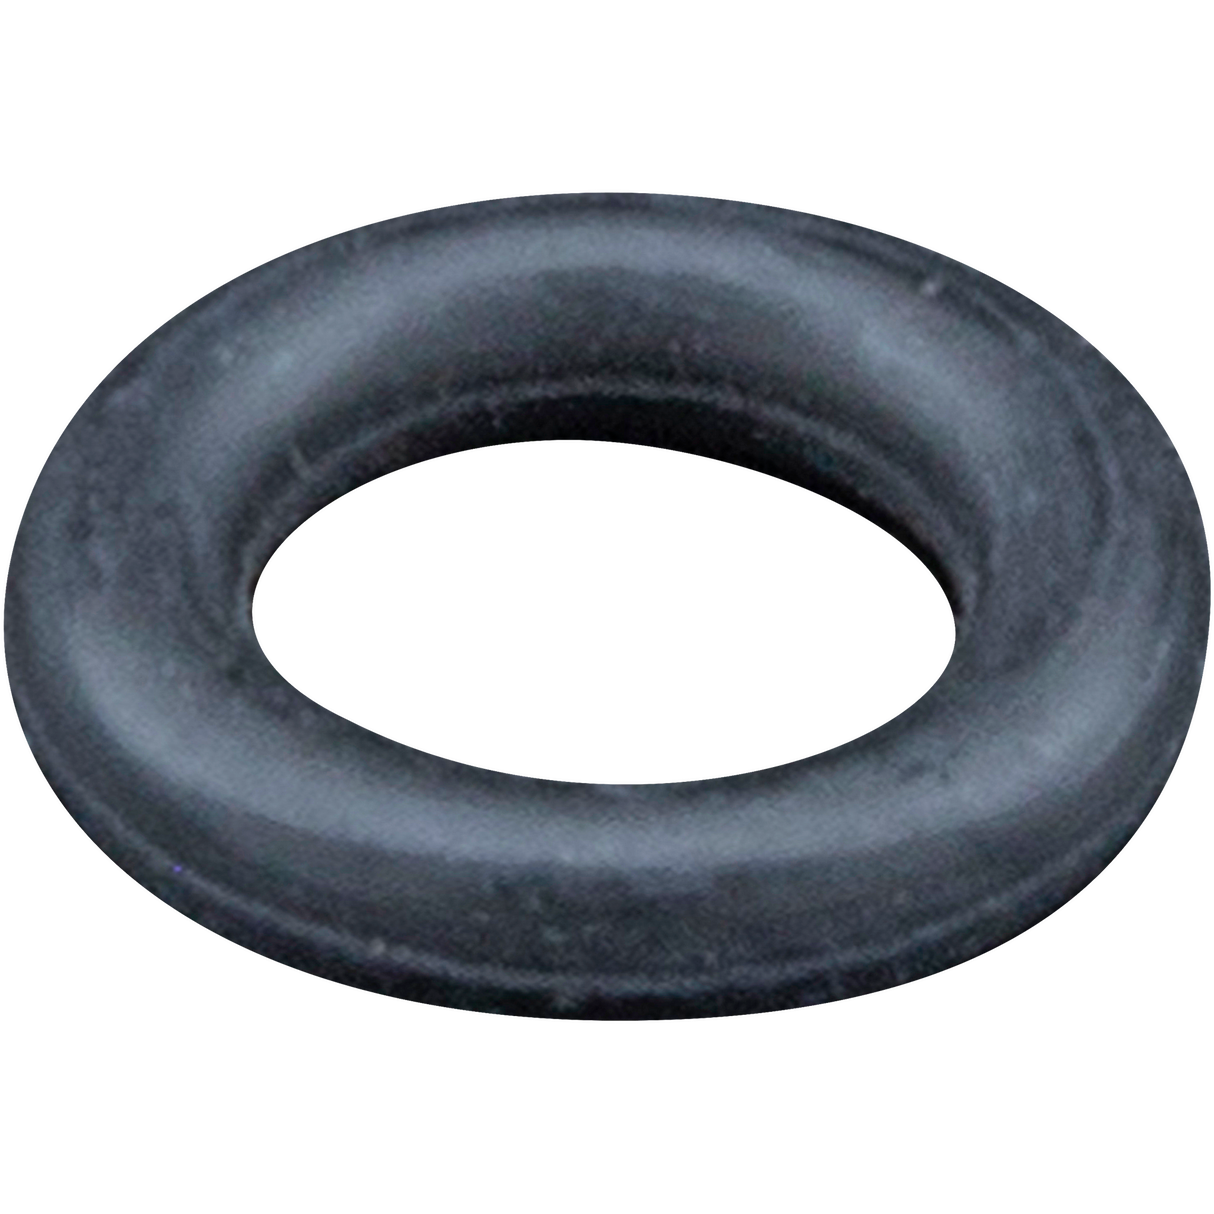 Rubber O Rings: Types, Rubbers, Benefits, and Design